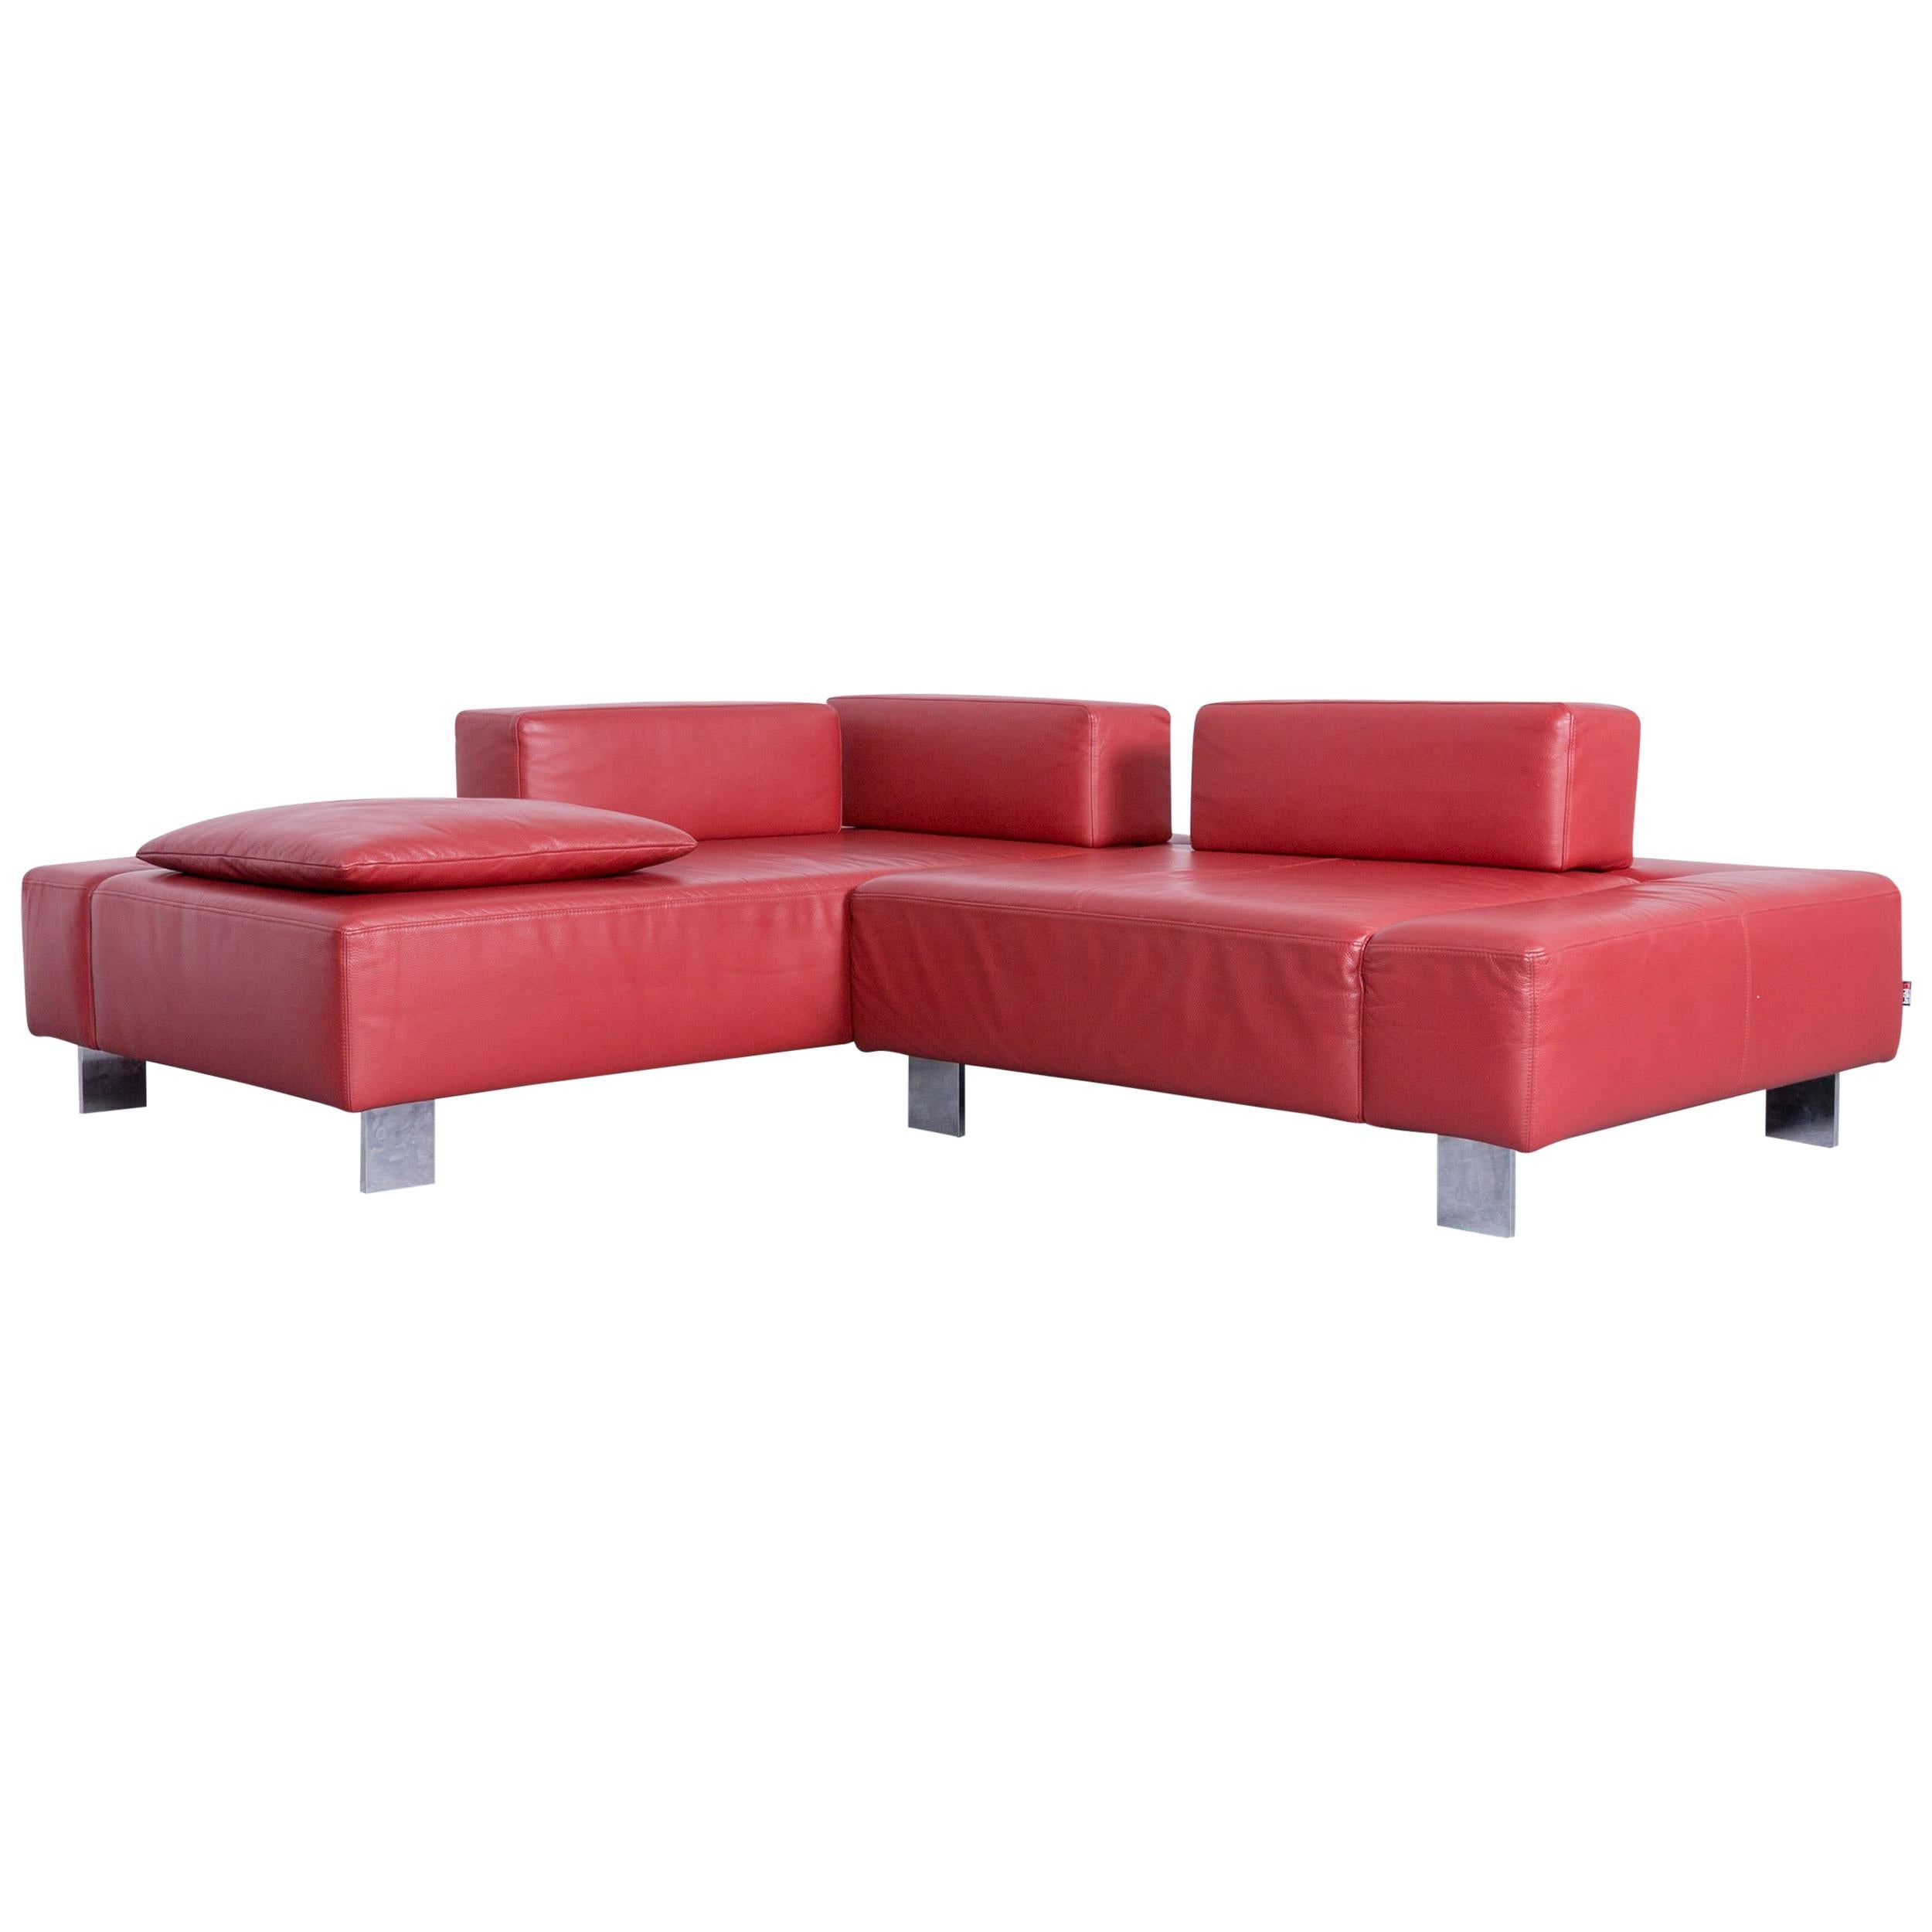 Brühl & Sippold Fields Designer Sofa Red Leather Corner Sofa with Function For Sale